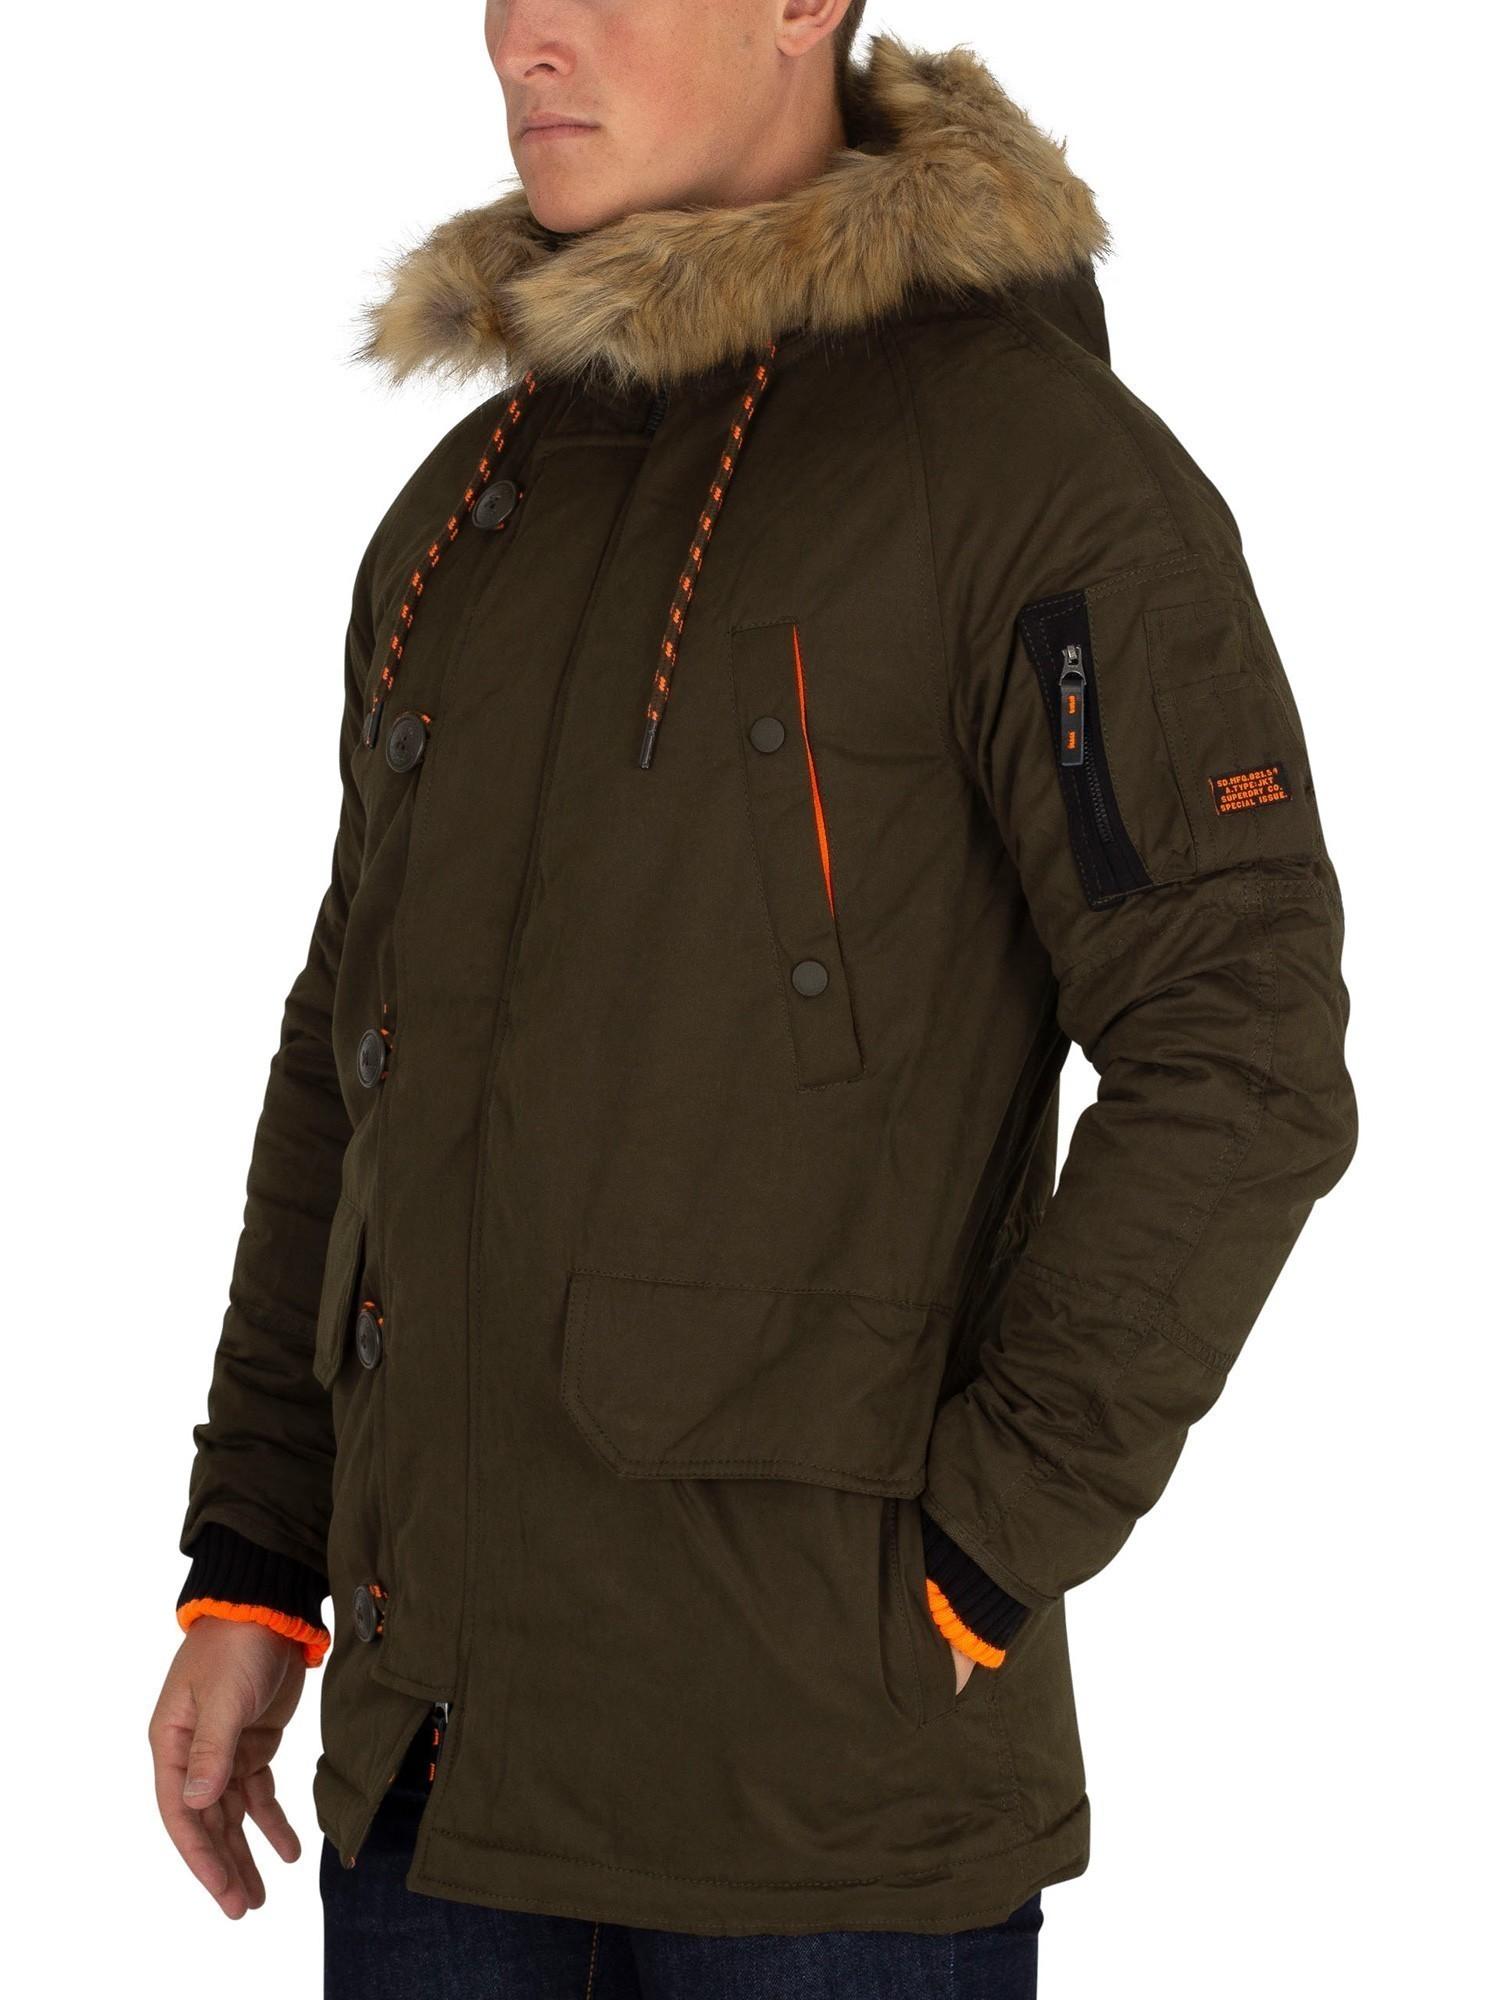 Superdry Fur Sdx Parka Jacket in Army (Green) for Men - Lyst